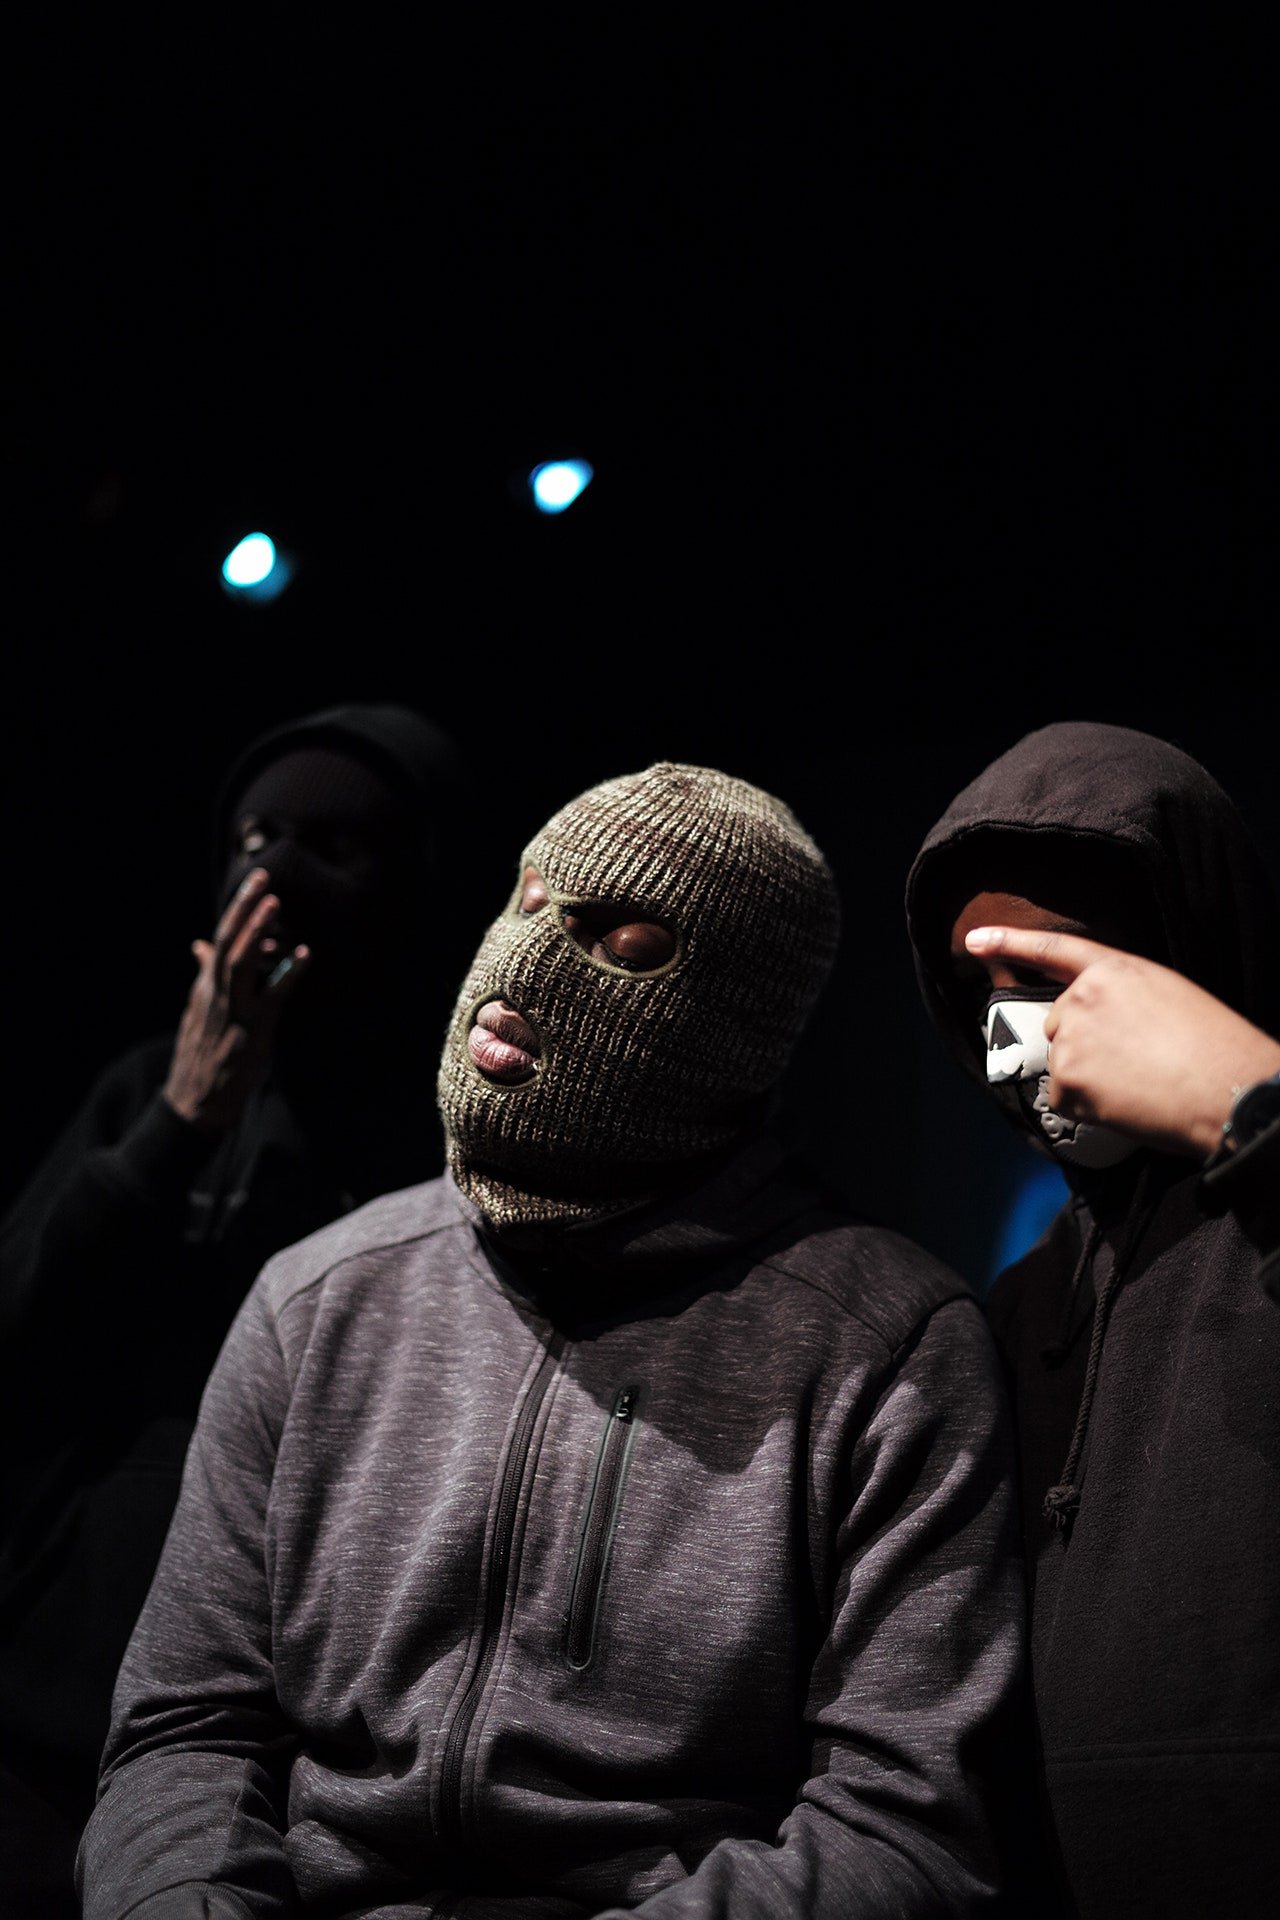 Drill music UK: can theatre challenge misconceptions?